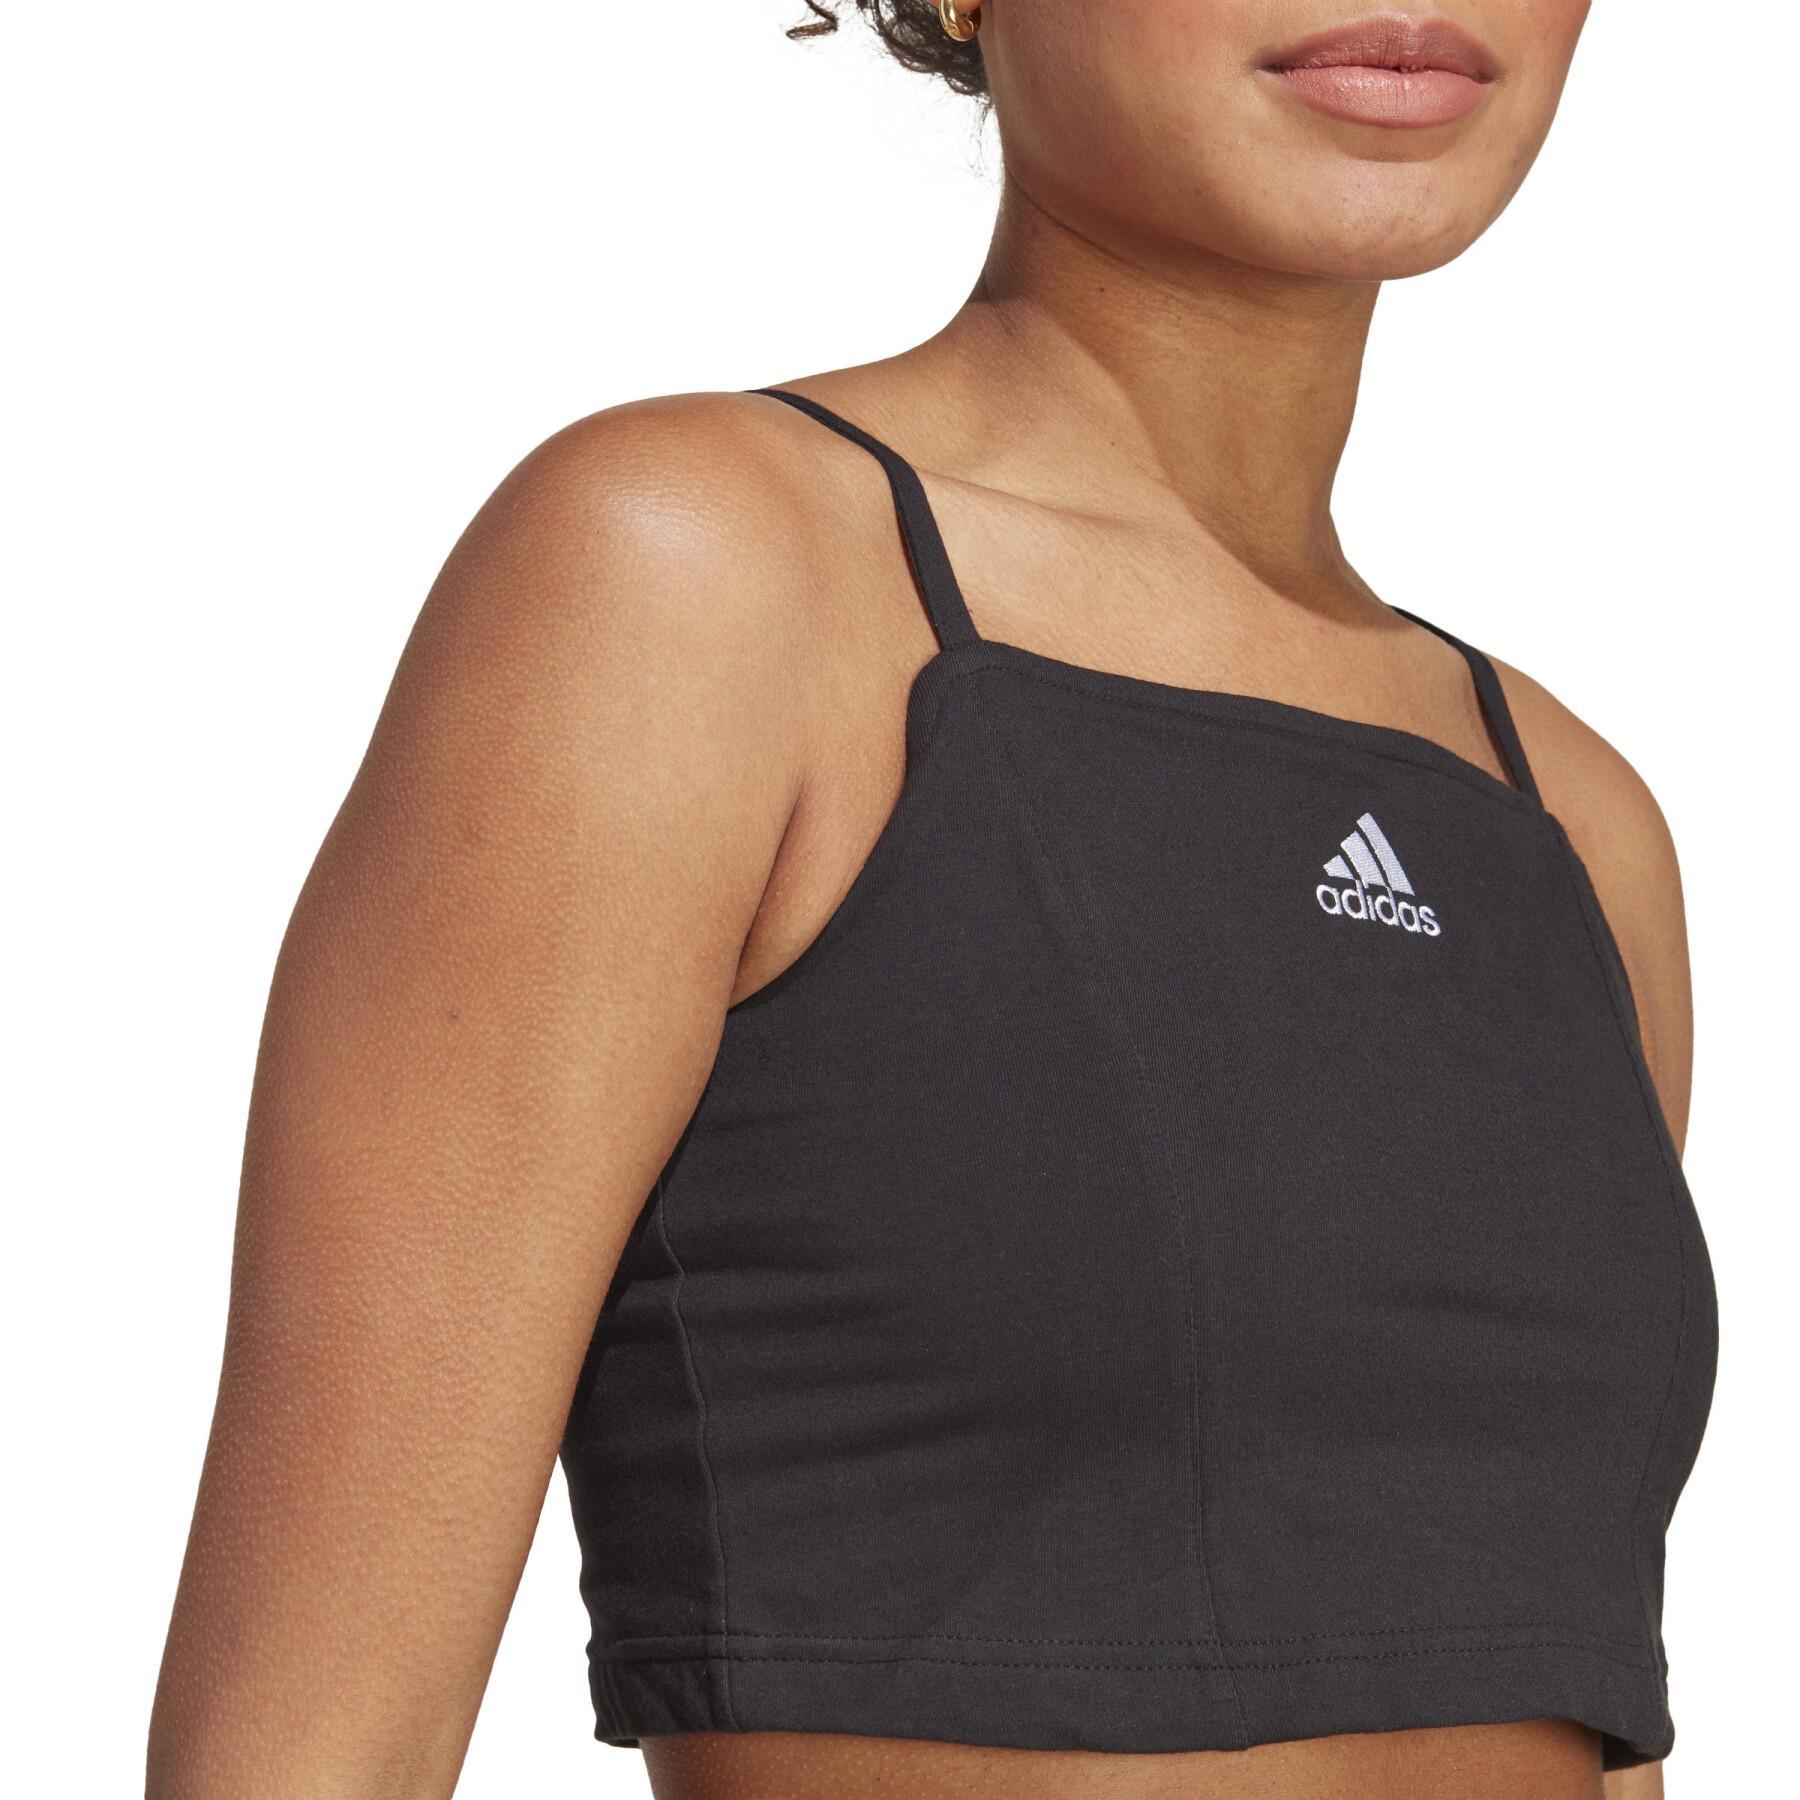 Women's tank top adidas Allover Graphic Corset-Inspired